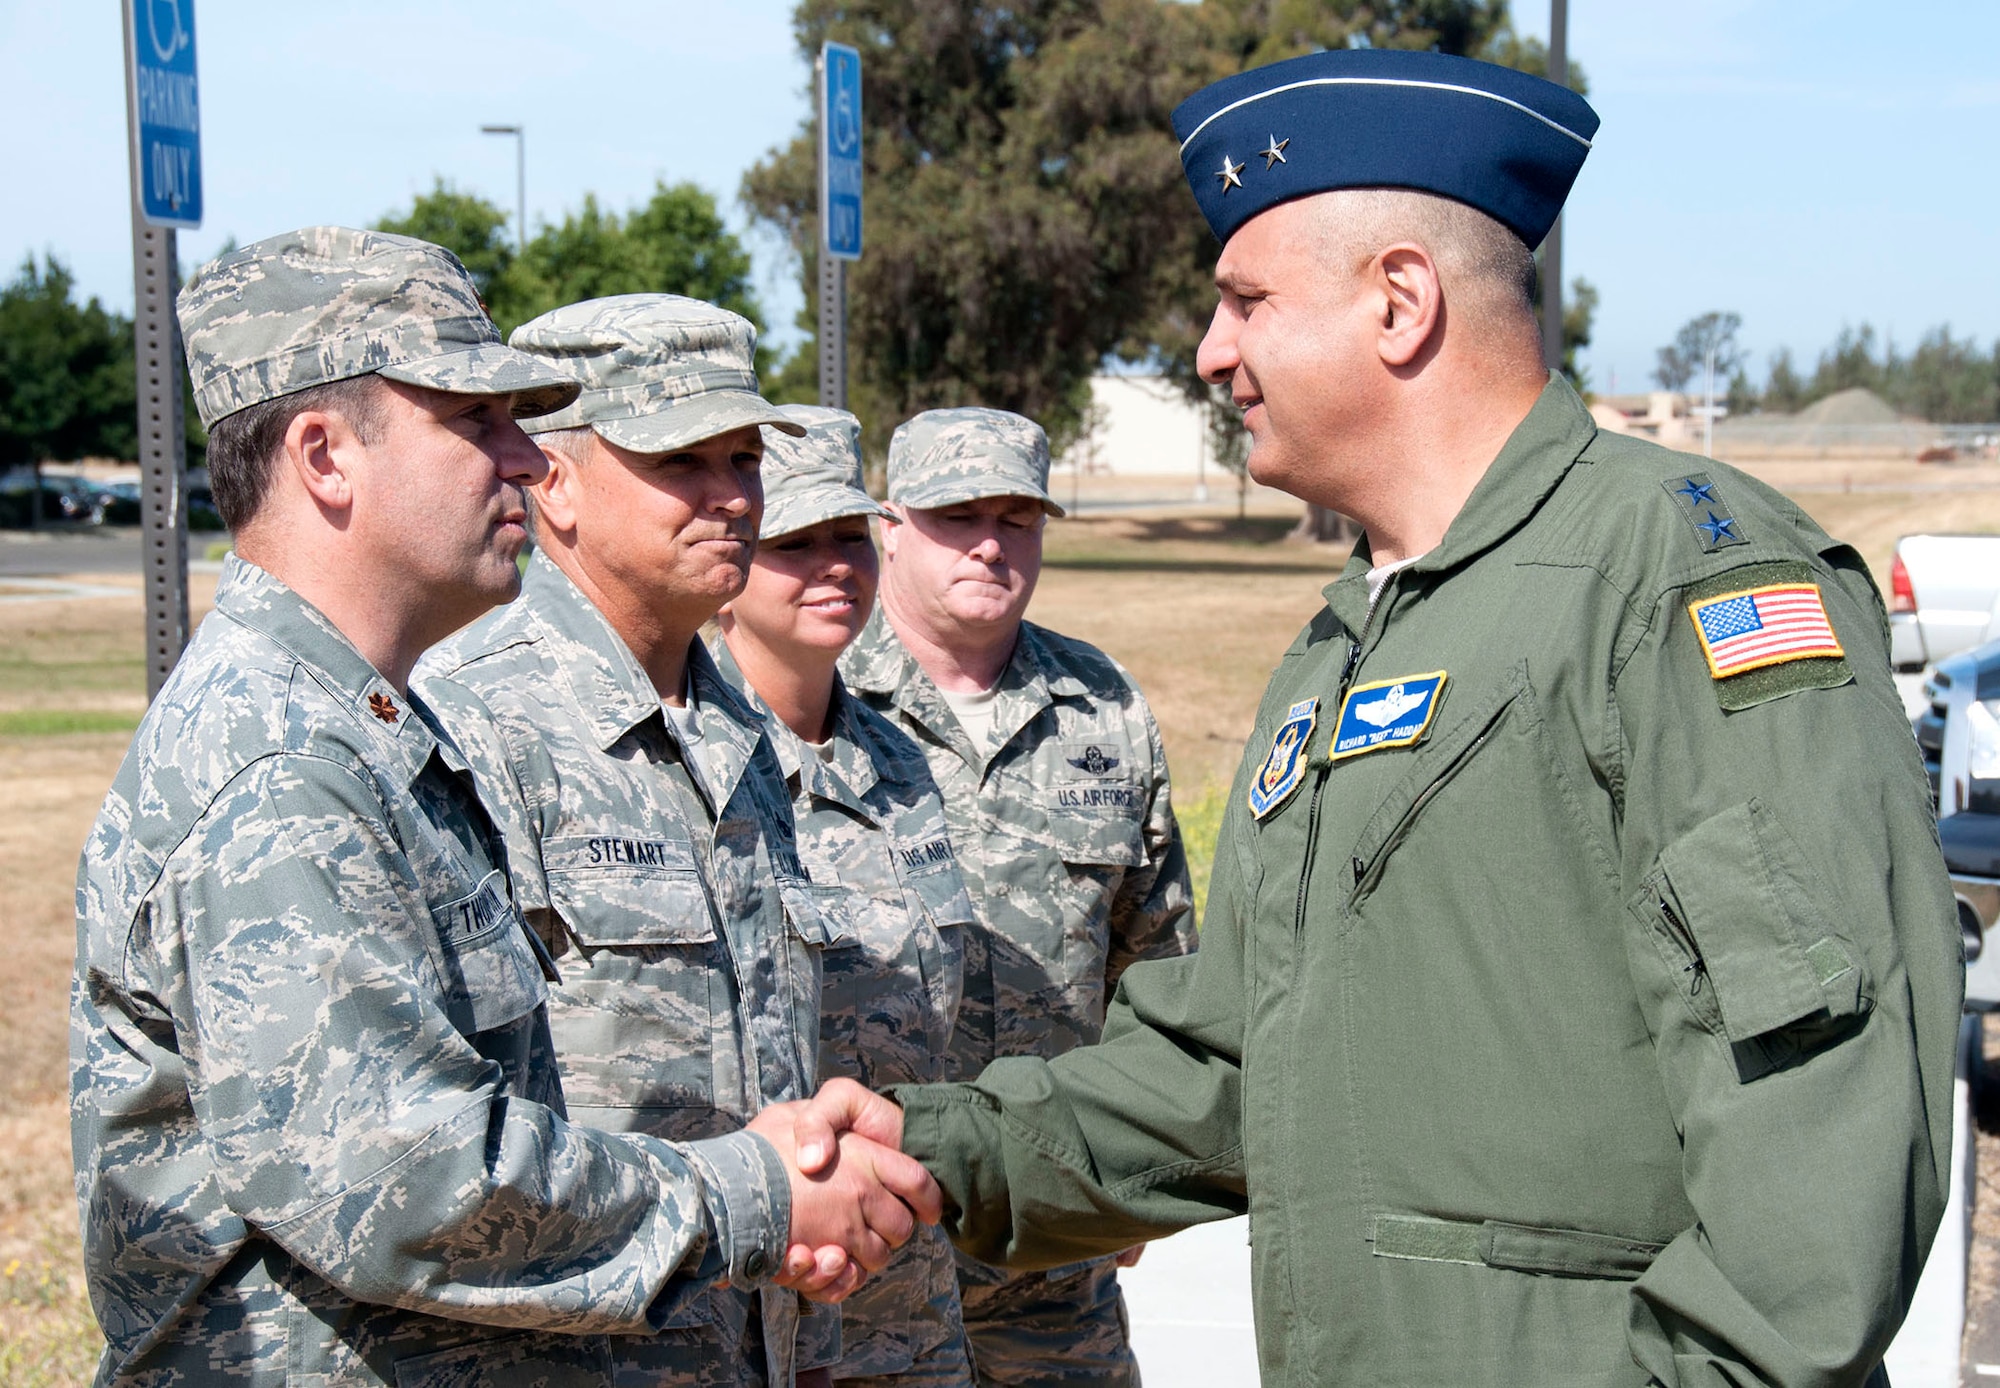 TRAVIS AIR FORCE BASE, Calif. -- Air Force Reserve Maj. Gen. Richard S. "Beef" Haddad (right), Air Force Reserve Command vice commander, shakes hands with 349th Air Mobility Wing personnel June 21, 2014 at Travis Air Force Base, Calif. From June 20-22, Haddad toured Travis Air Force Base, Calif., where he visited a number of facilities and meet with Airmen to gain a better understanding of air mobility innovations helping Travis AFB personnel deliver global mobility support for America anytime. (U.S. Air Force photo/Tech. Sgt. Stephen J. Collier)